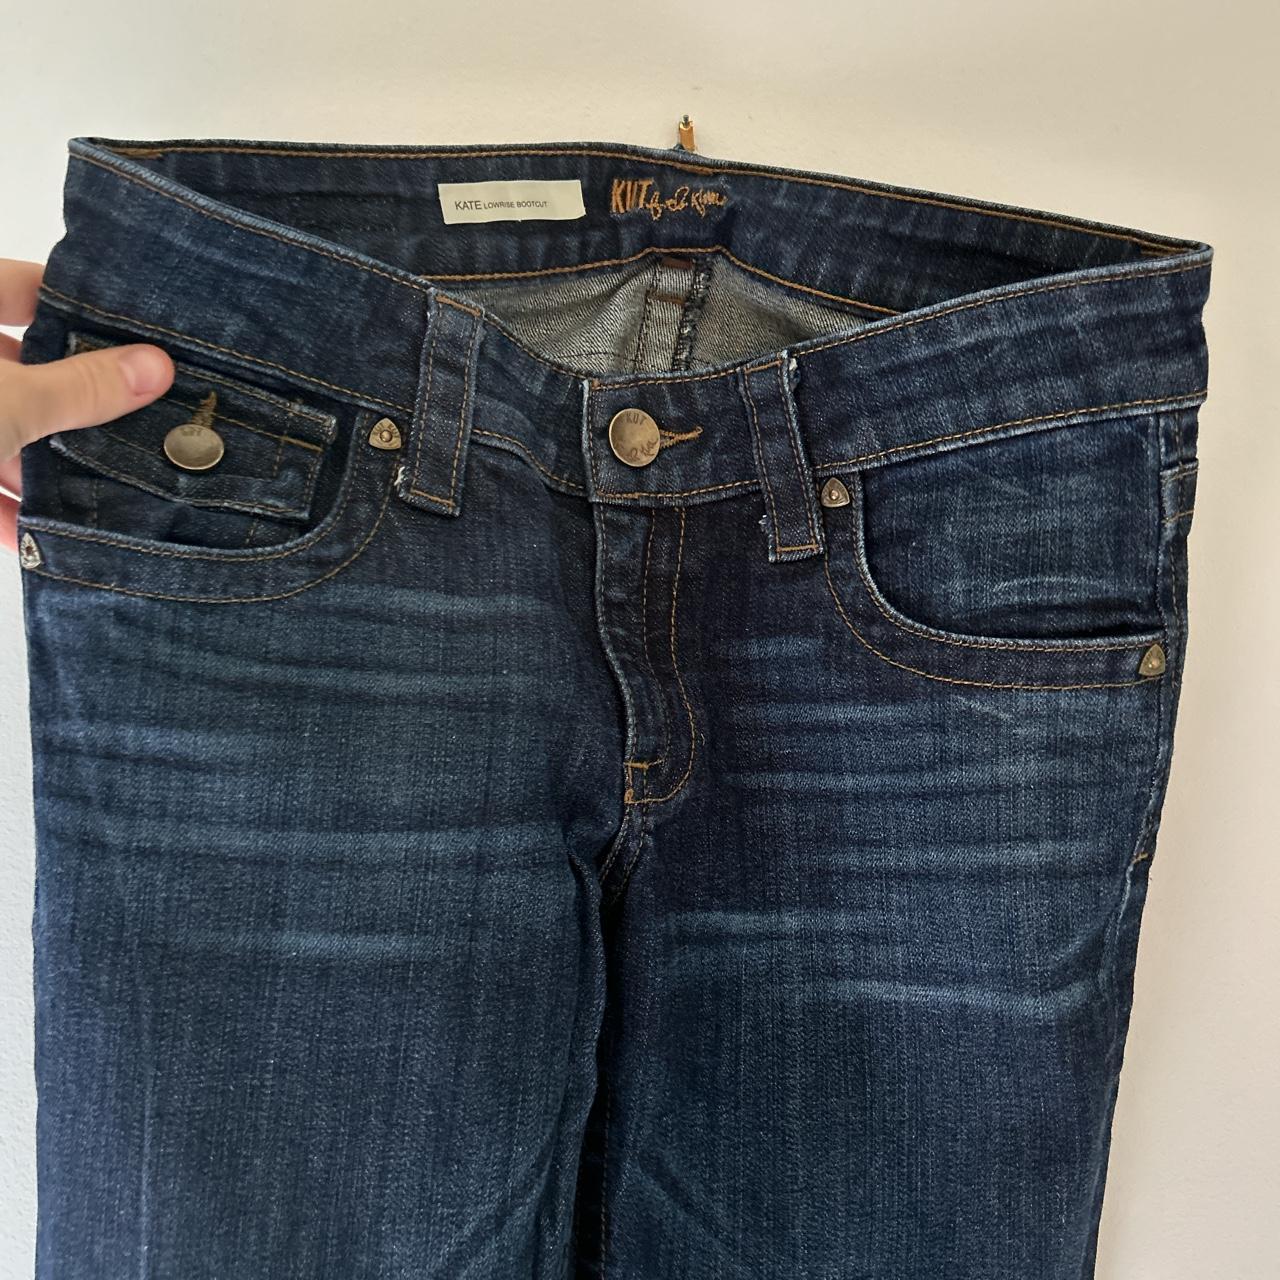 Kut from the Kloth Women's Navy Jeans (2)